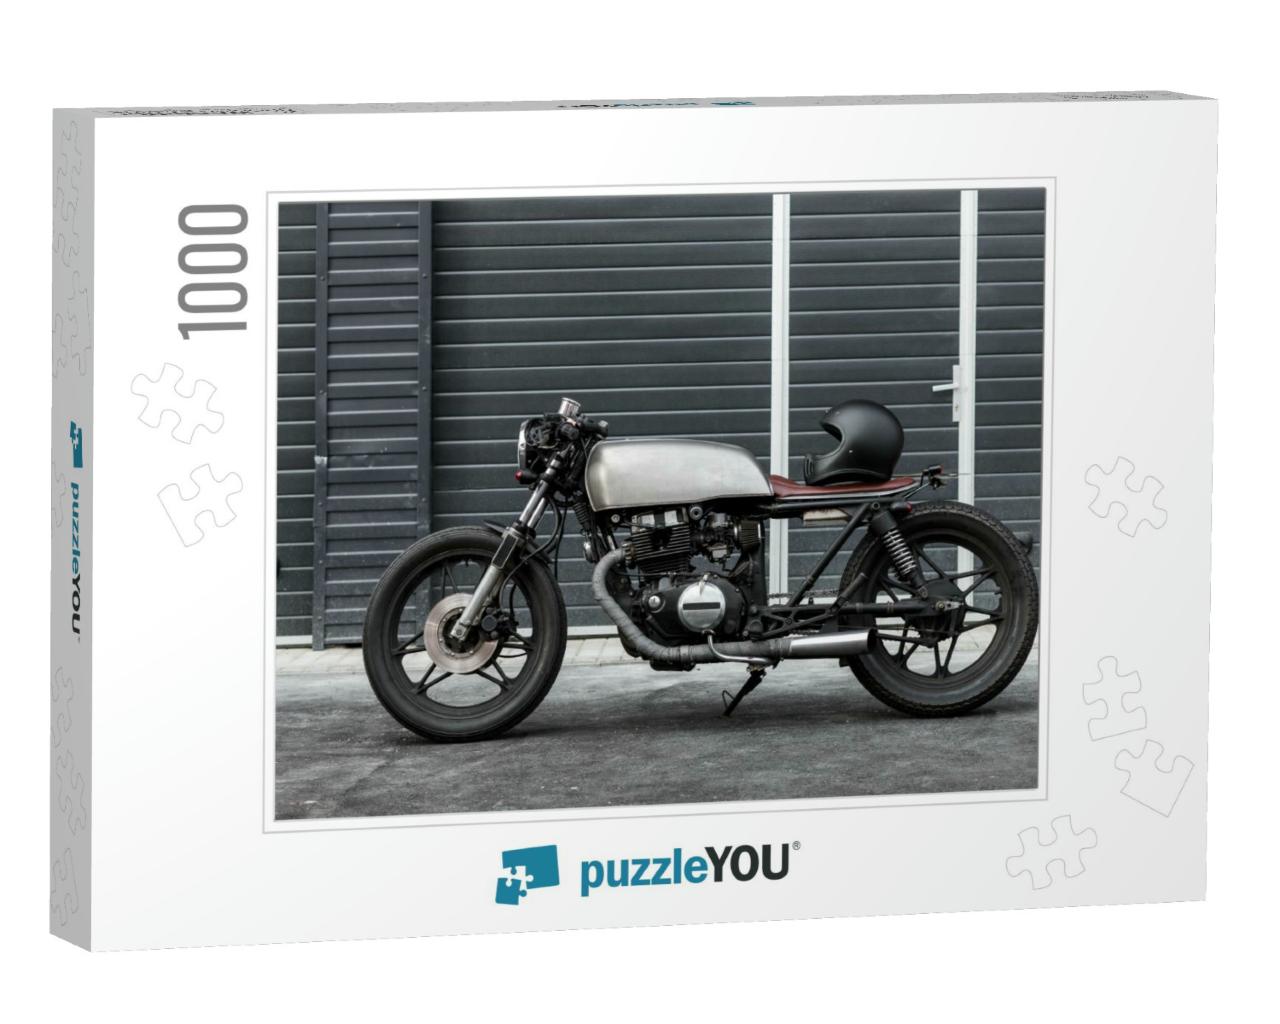 Custom Motorcycle Parking Near Industrial Building. Every... Jigsaw Puzzle with 1000 pieces